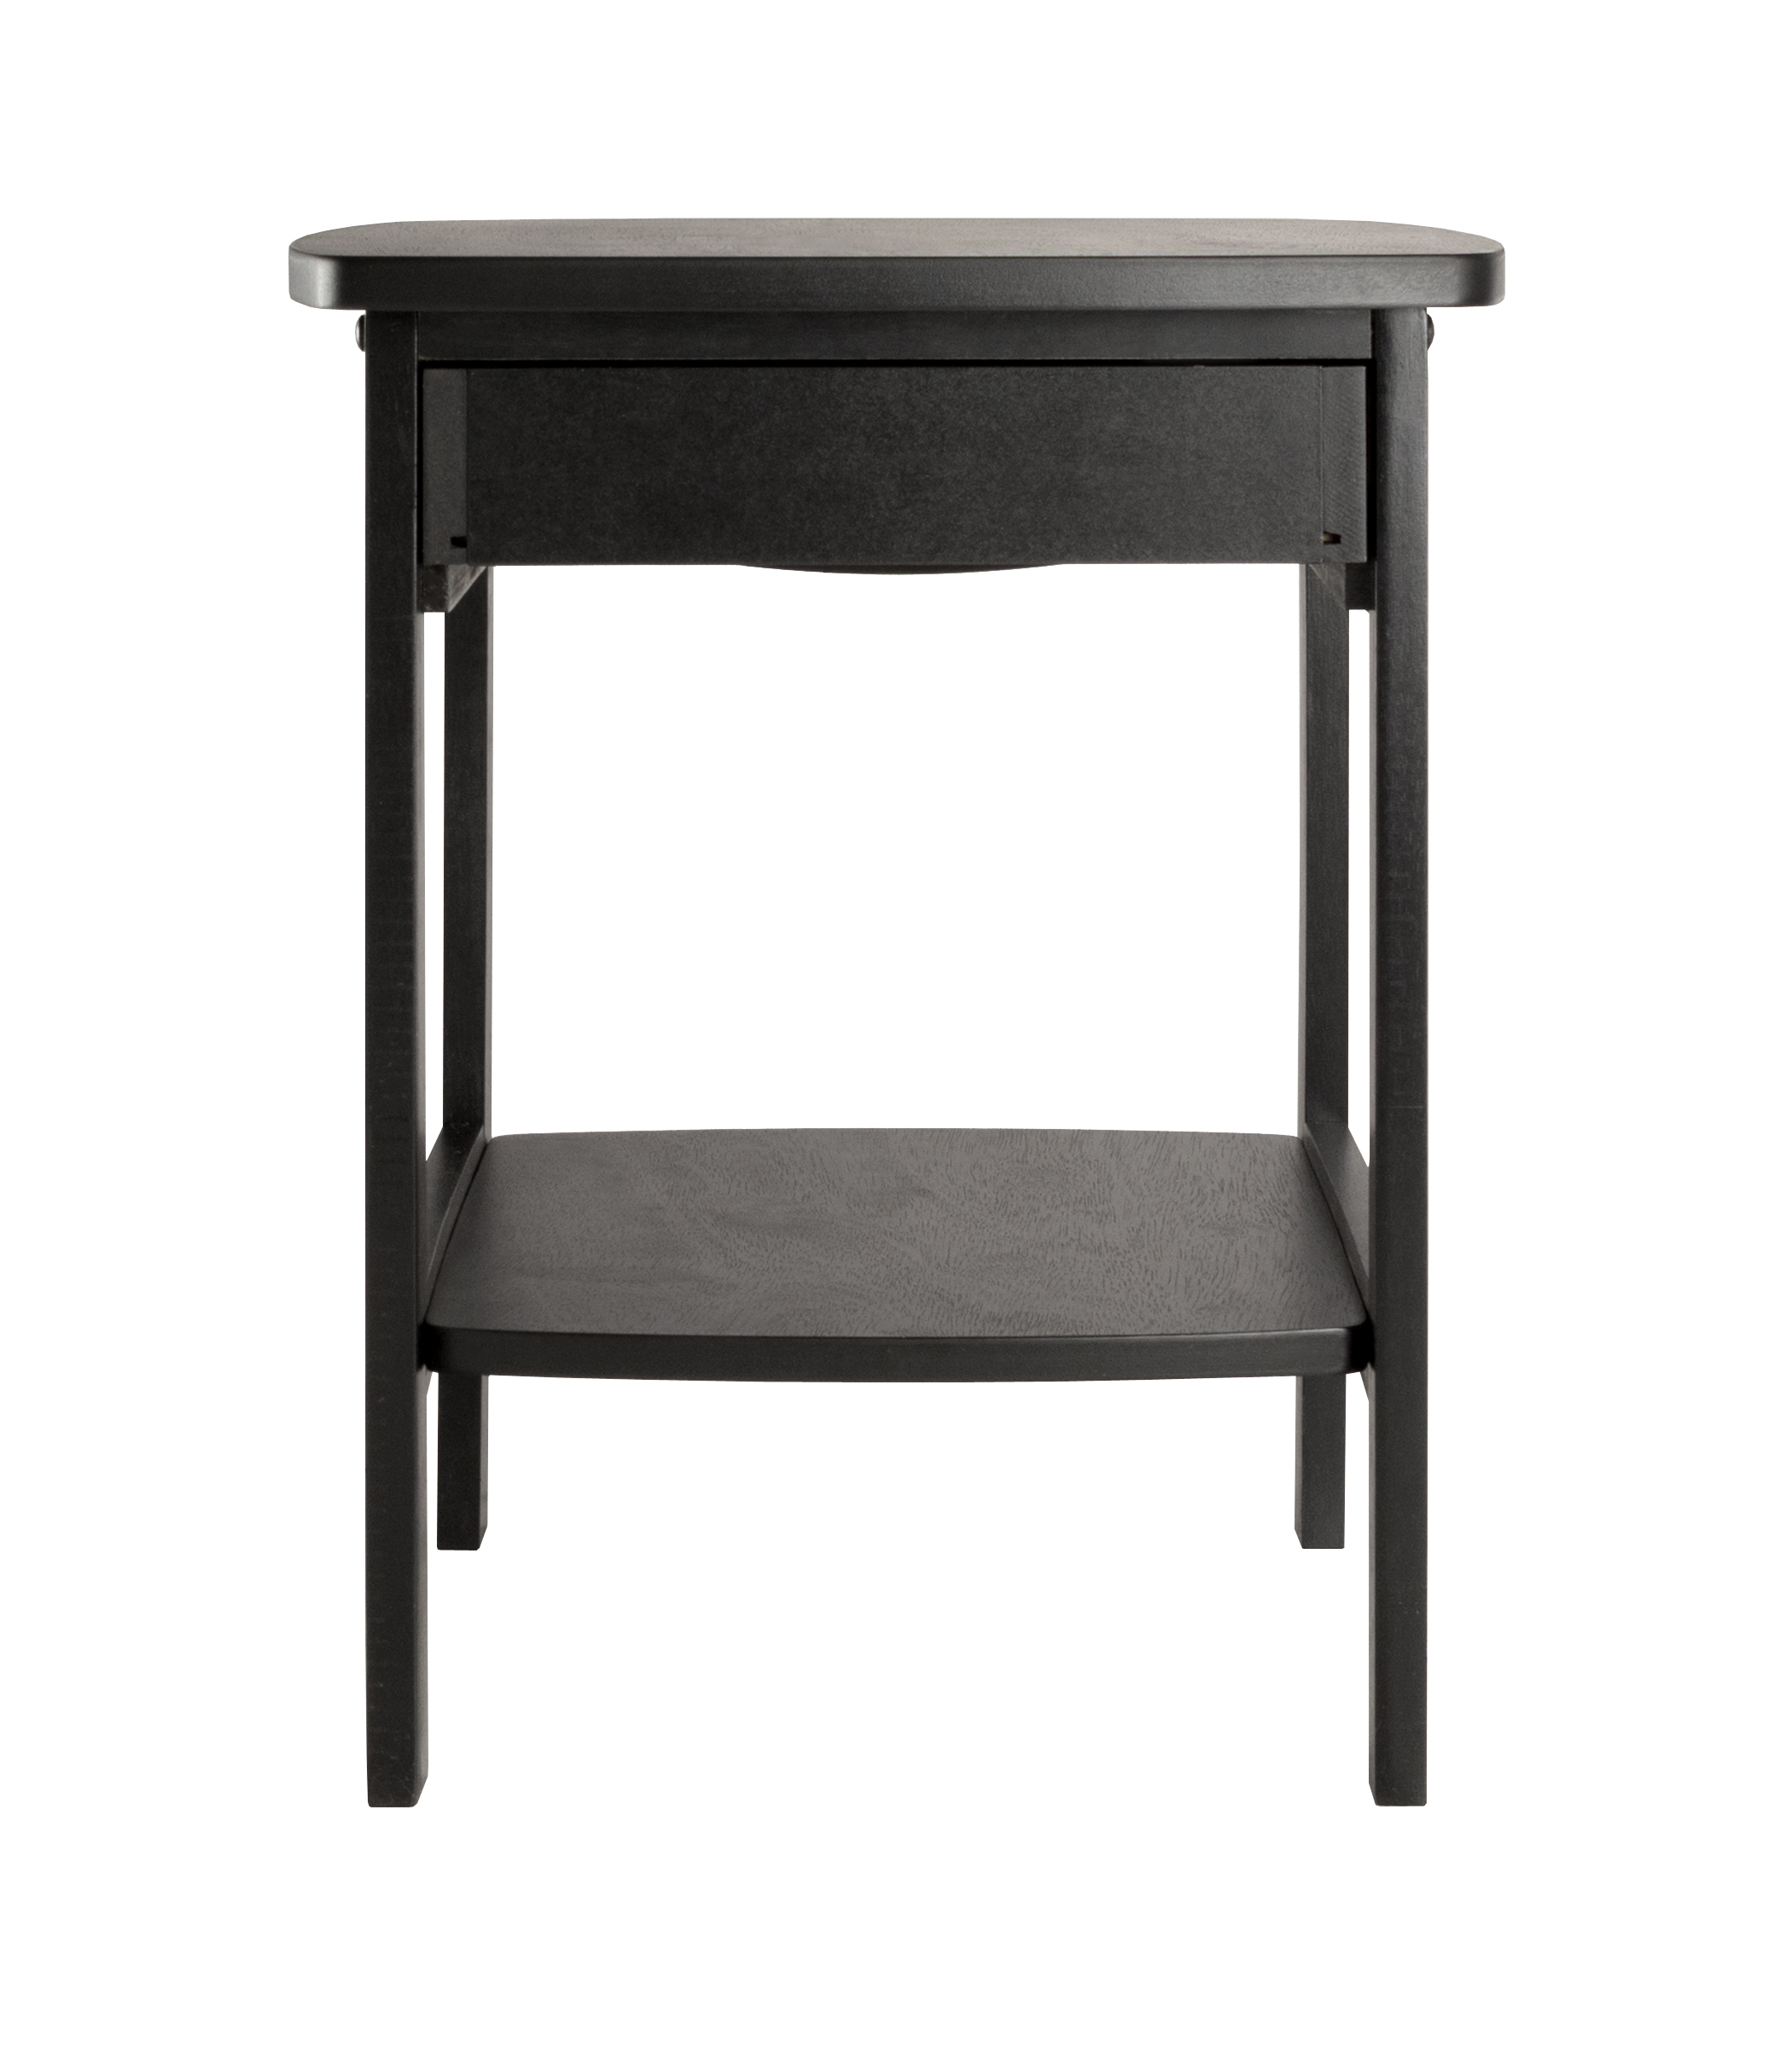 Winsome Wood Claire Curved Nightstand, Black Finish - image 4 of 5